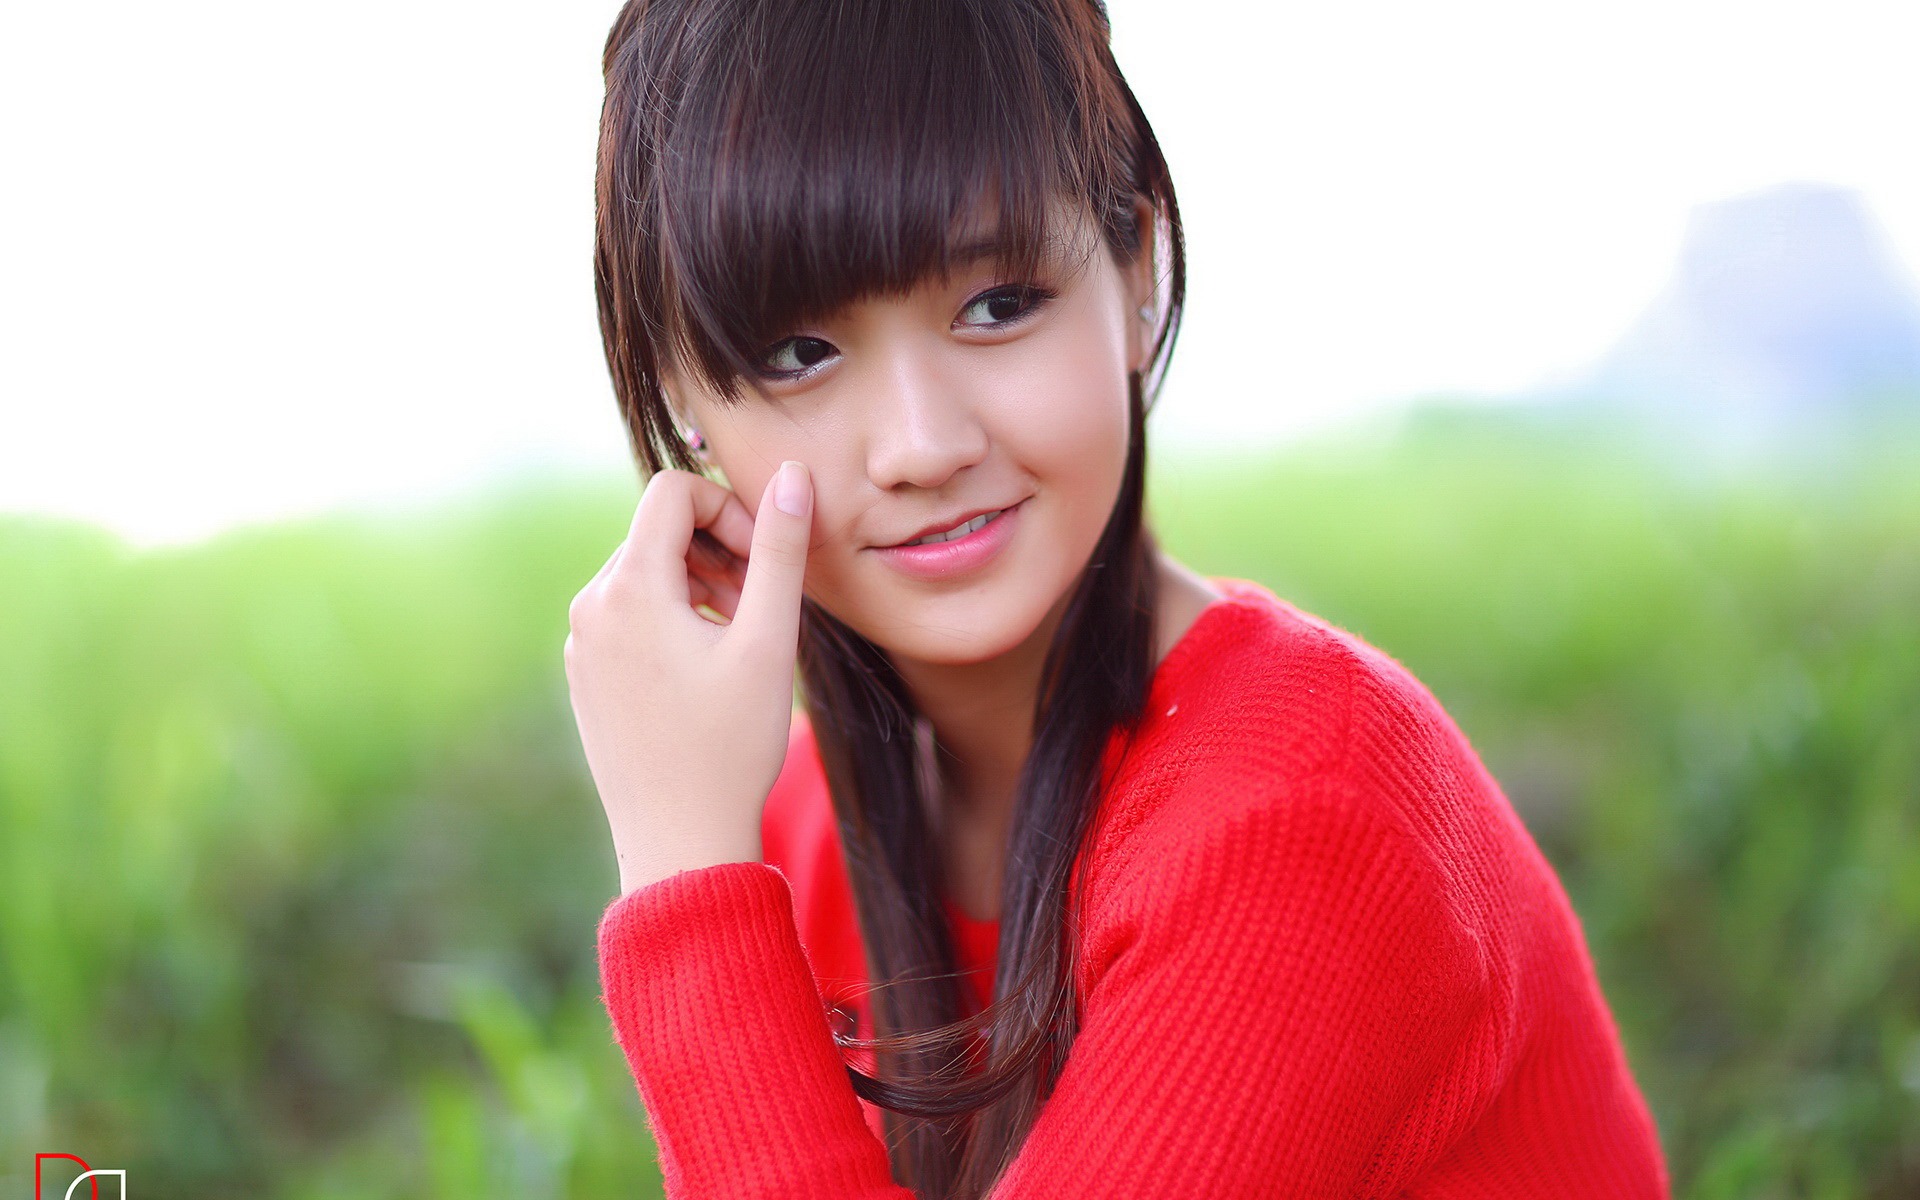 Pure and lovely young Asian girl HD wallpapers collection (4) #28 - 1920x1200